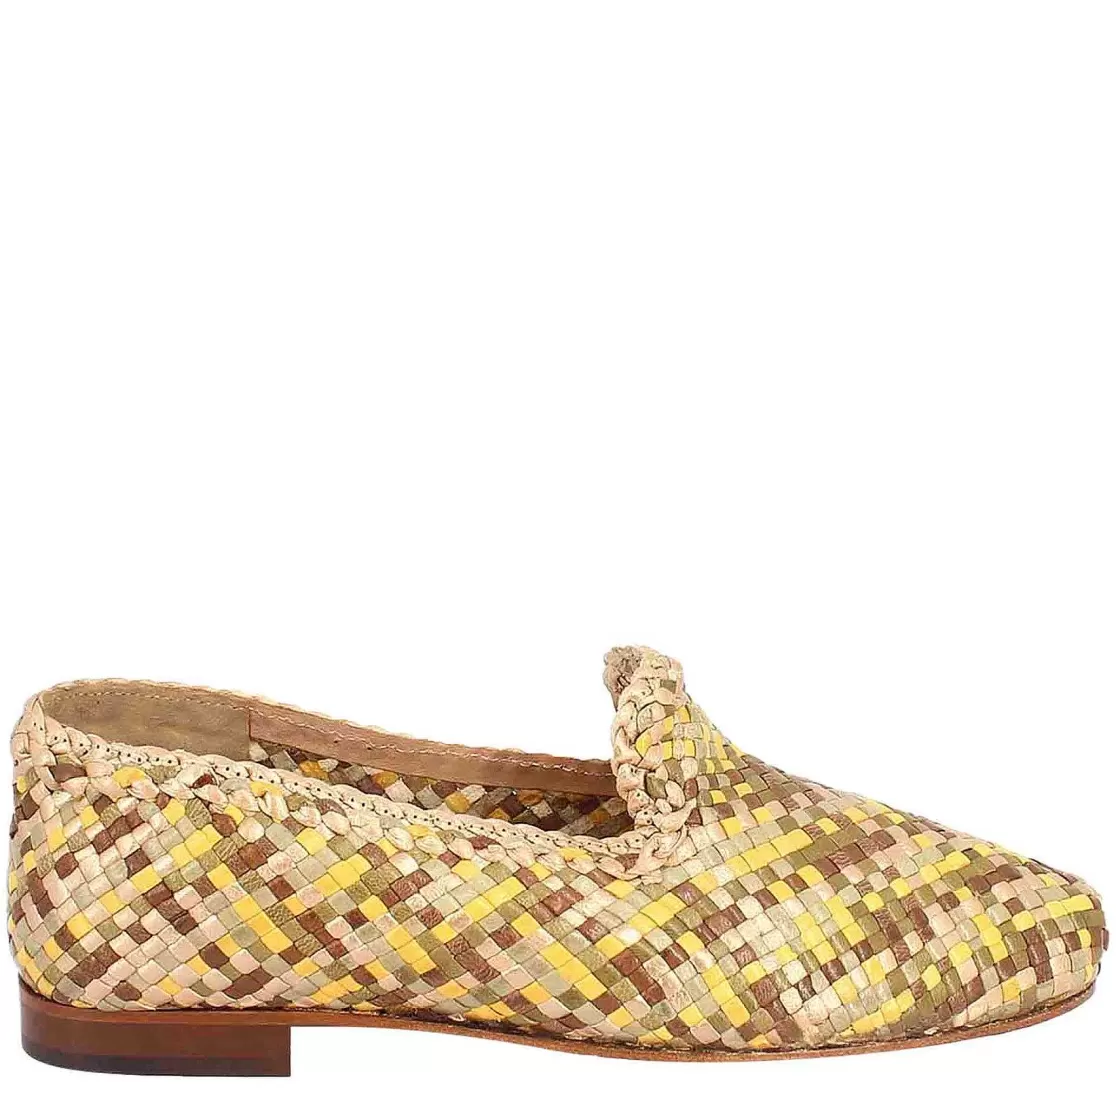 Leonardo Handmade Women'S Moccasins In Yellow, Green And Brown Braided Leather Store